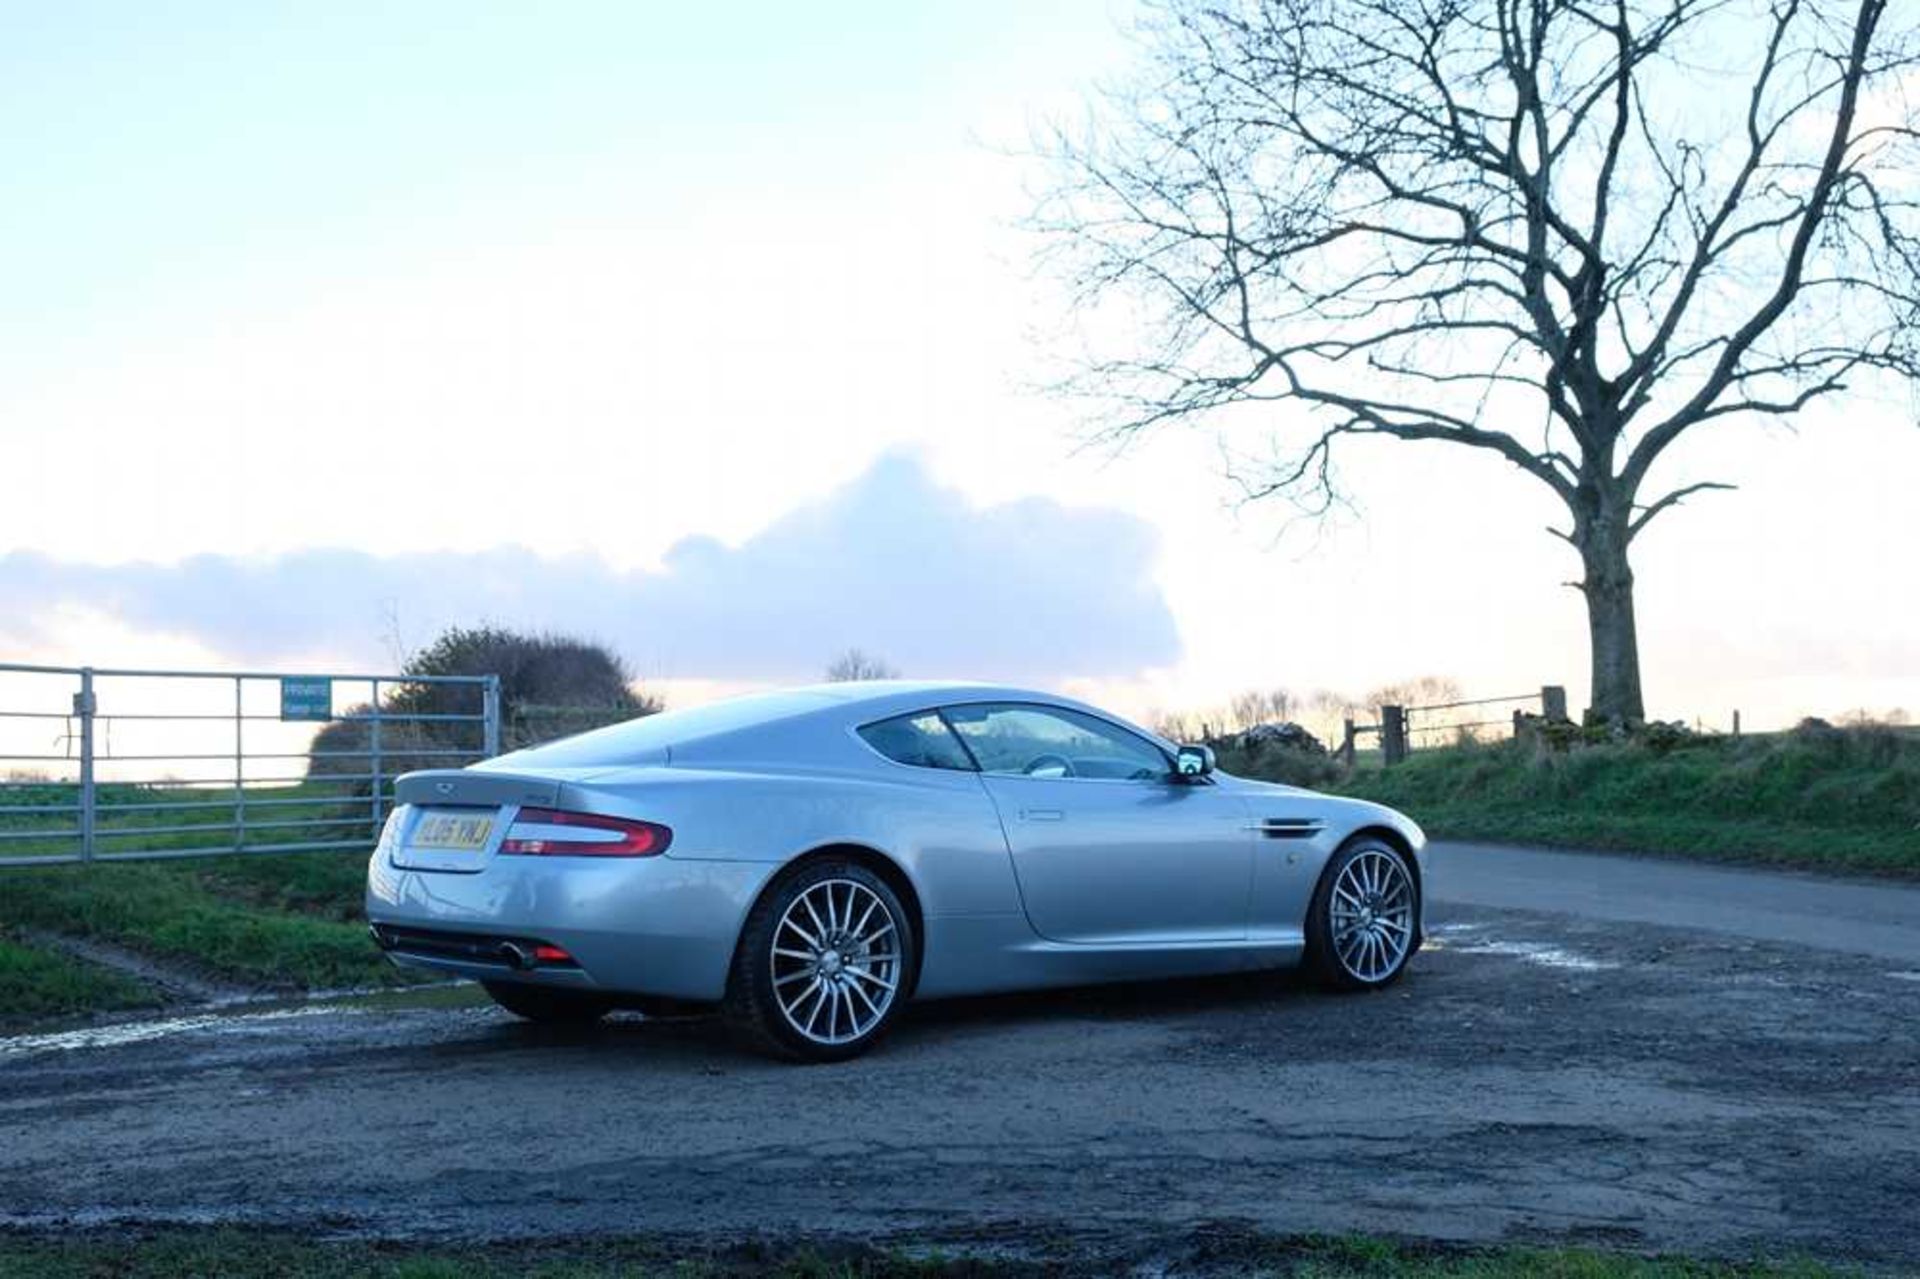 2005 Aston Martin DB9 c.25,000 from new and 4 former keepers - Image 59 of 59